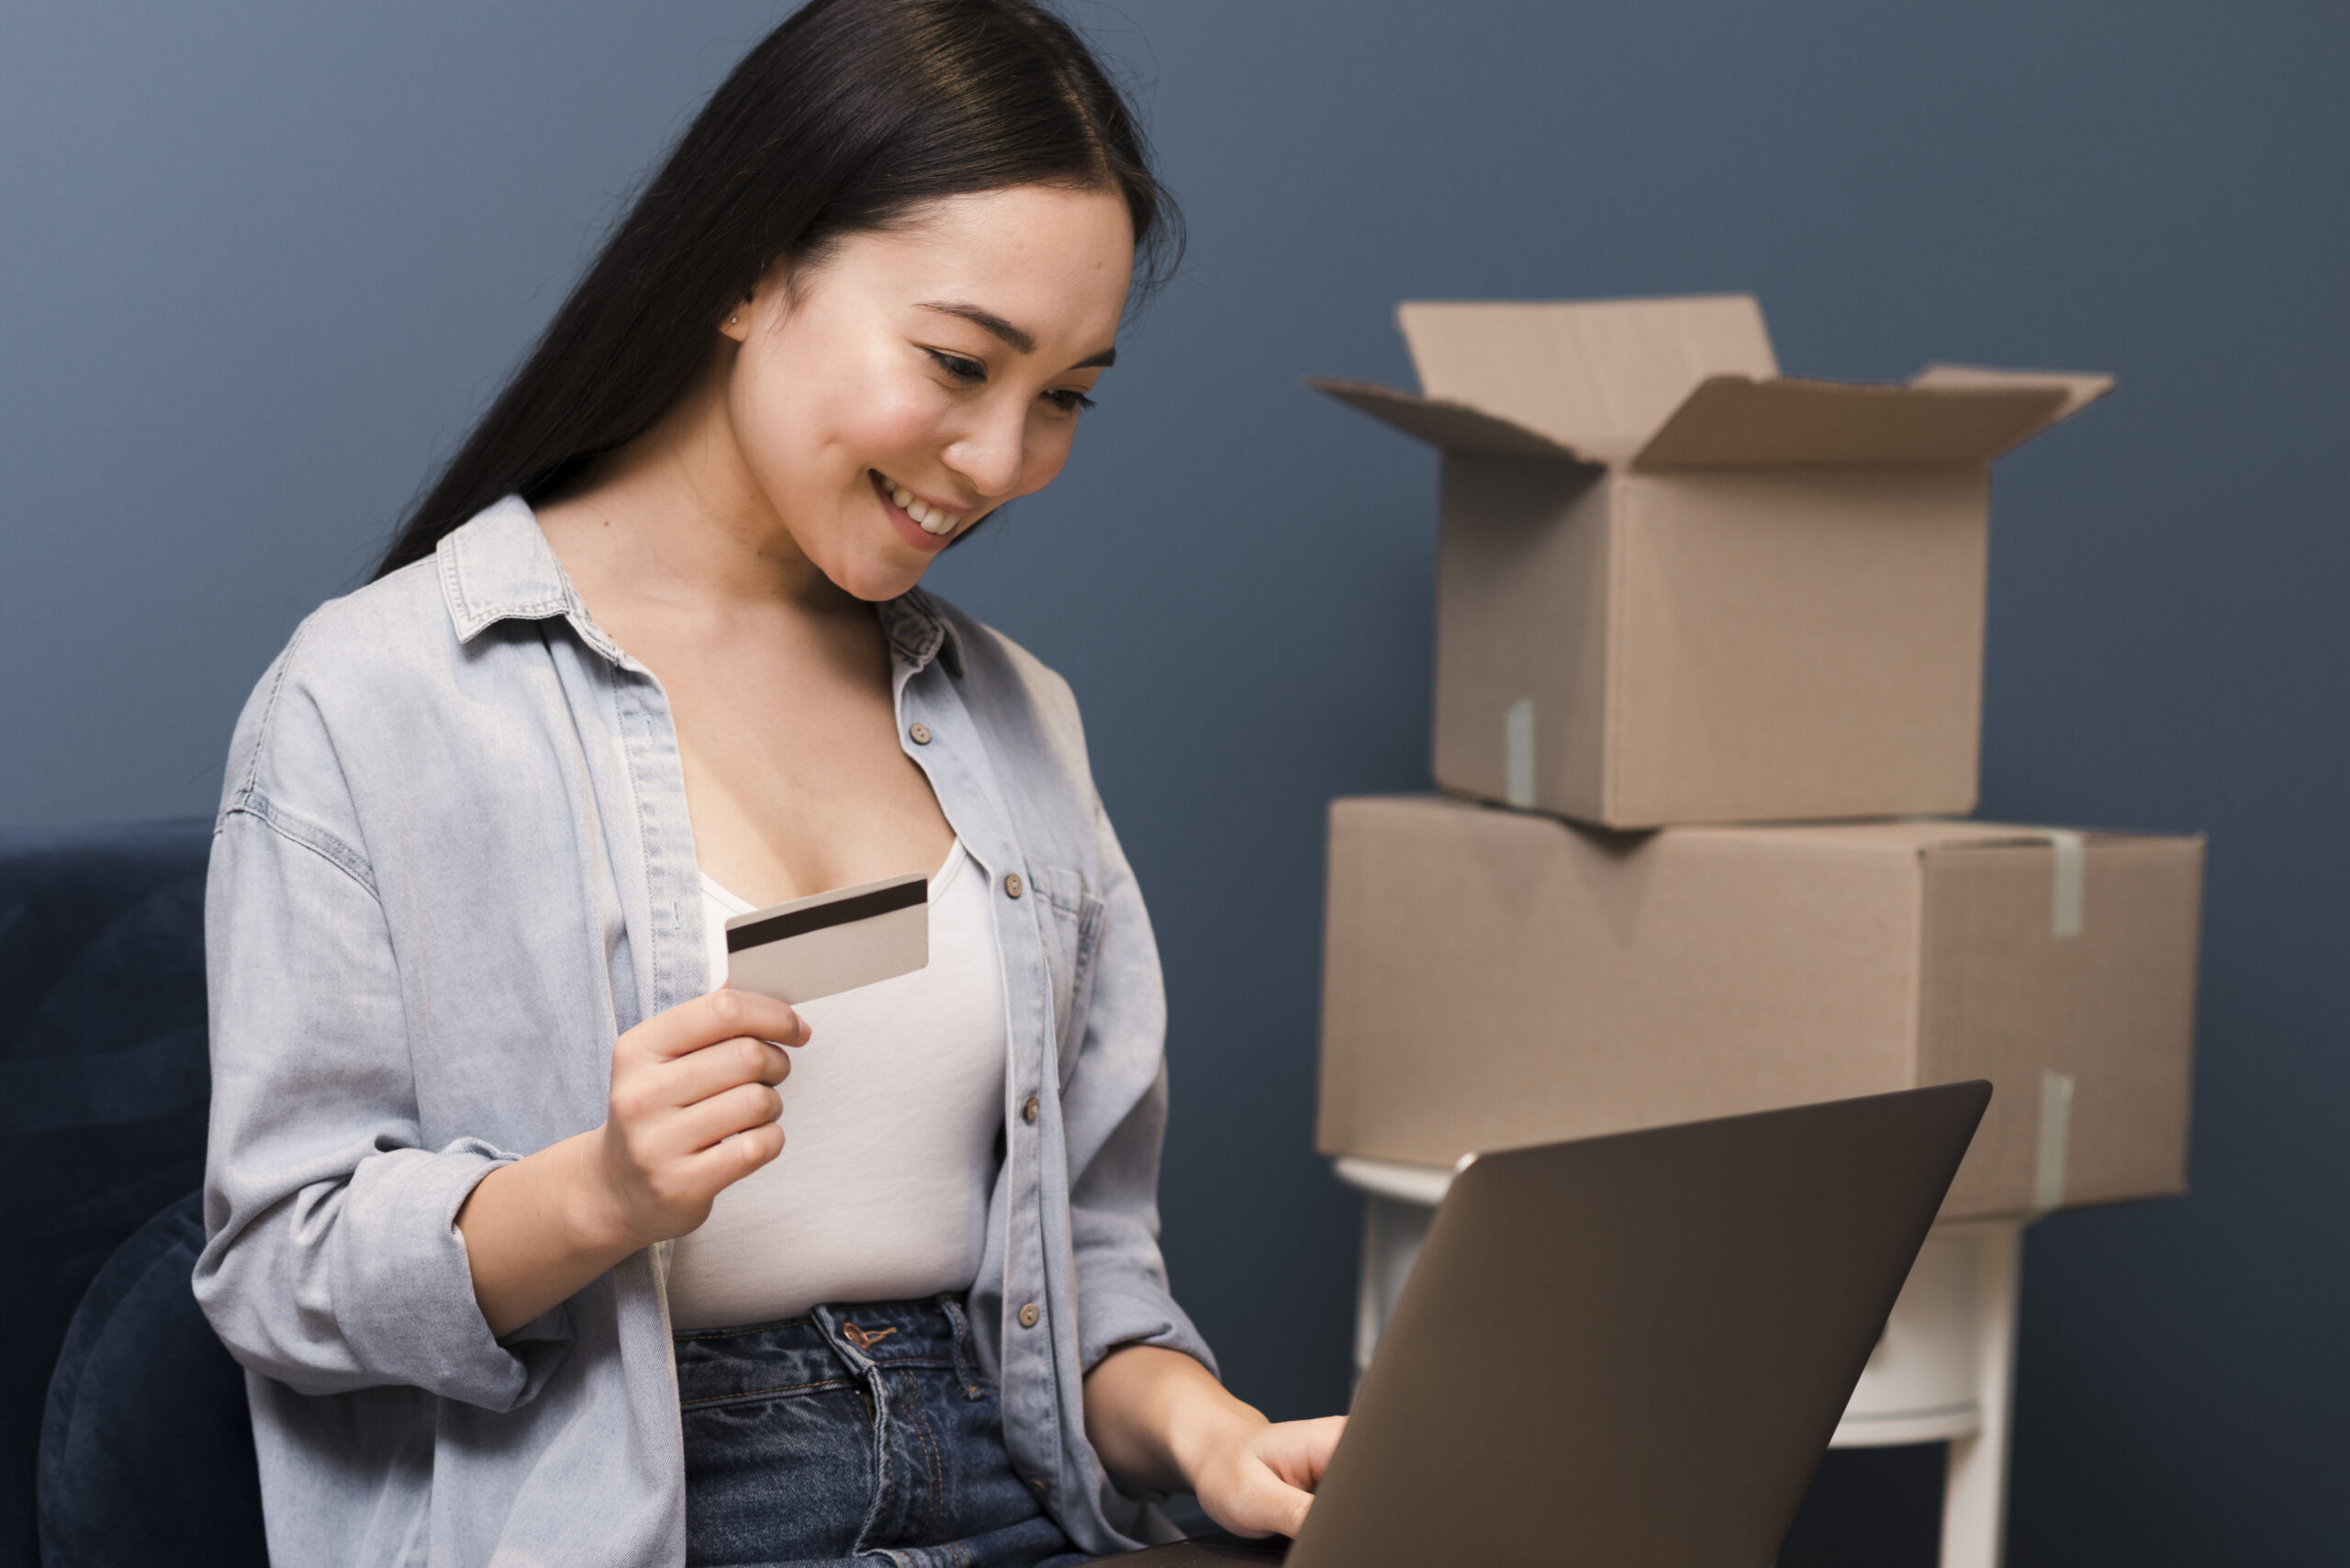 Guide to Starting a Dropshipping Business in the Philippines